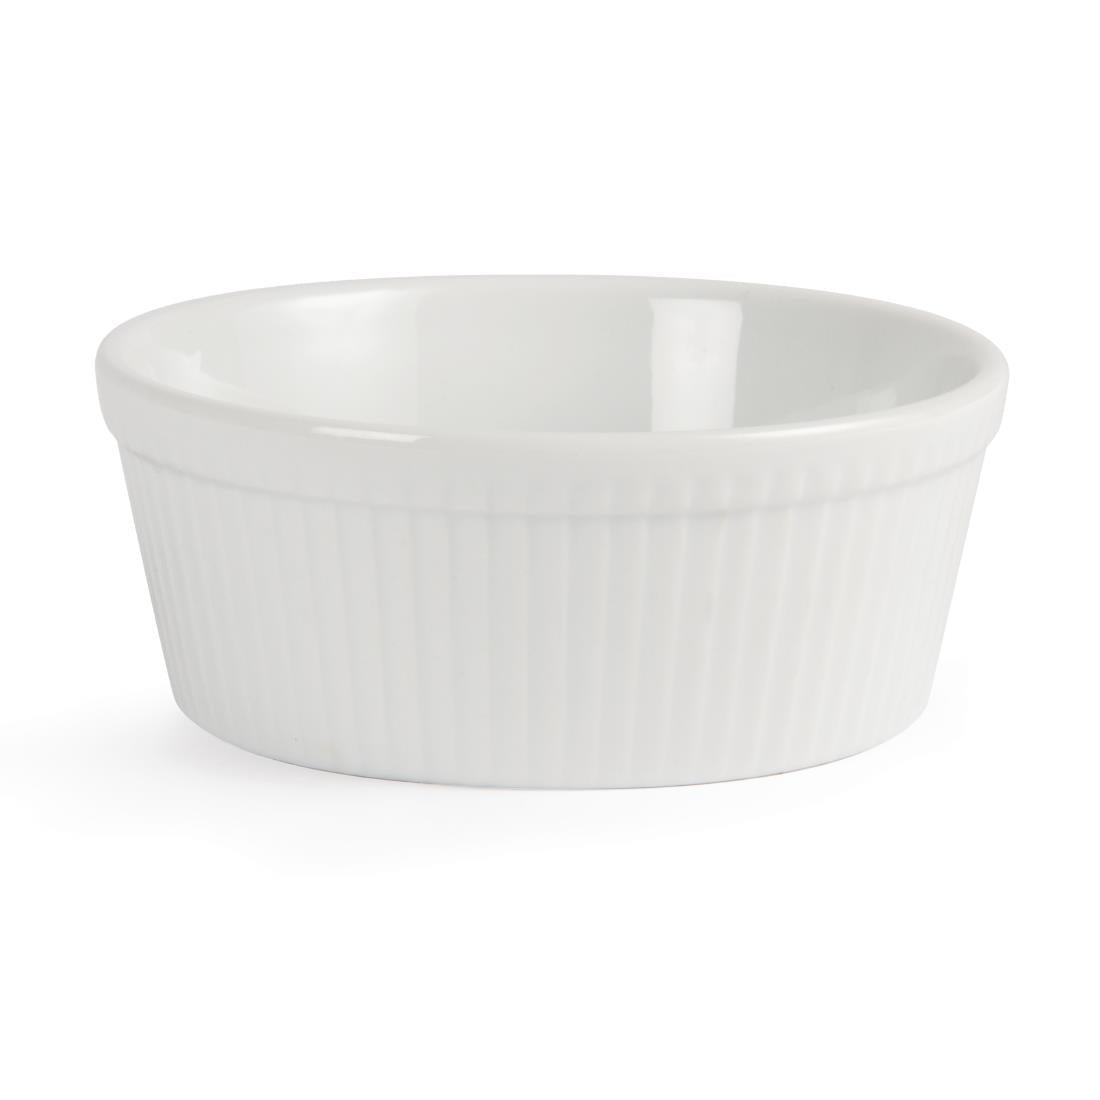 C042 Olympia Whiteware Round Pie Dishes 134mm (Pack of 6)